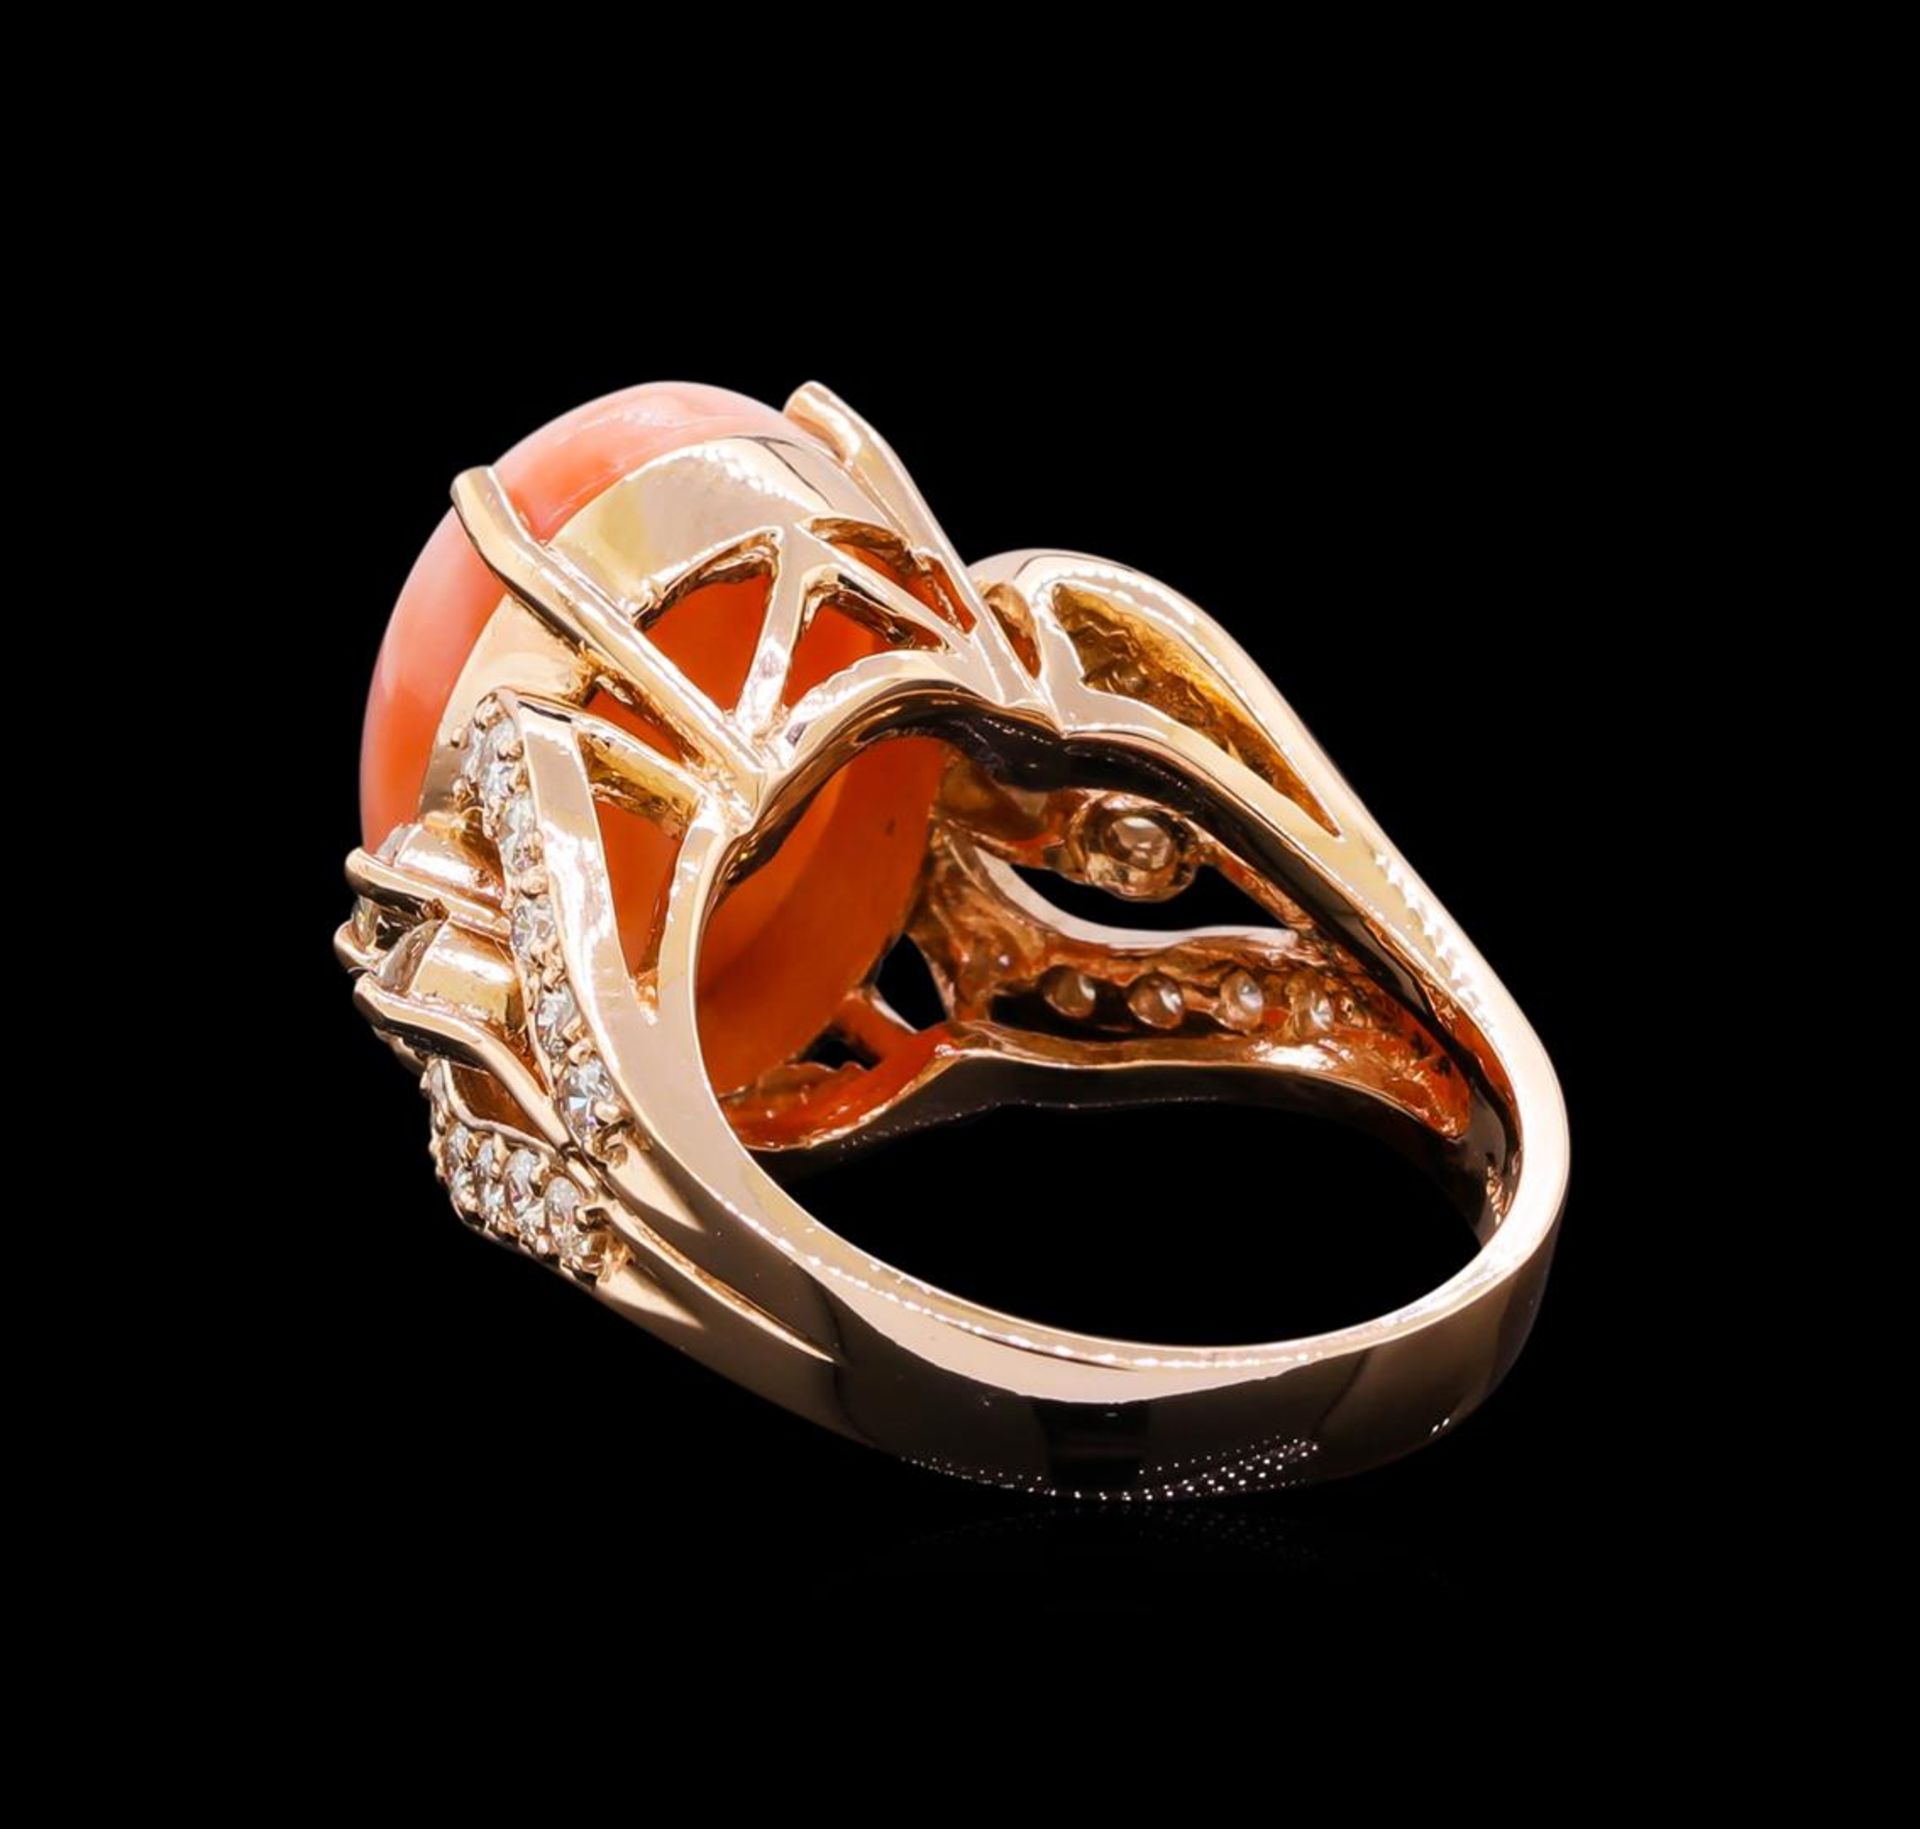 5.68 ctw Pink Coral and Diamond Ring - 14KT Rose Gold - Image 3 of 5